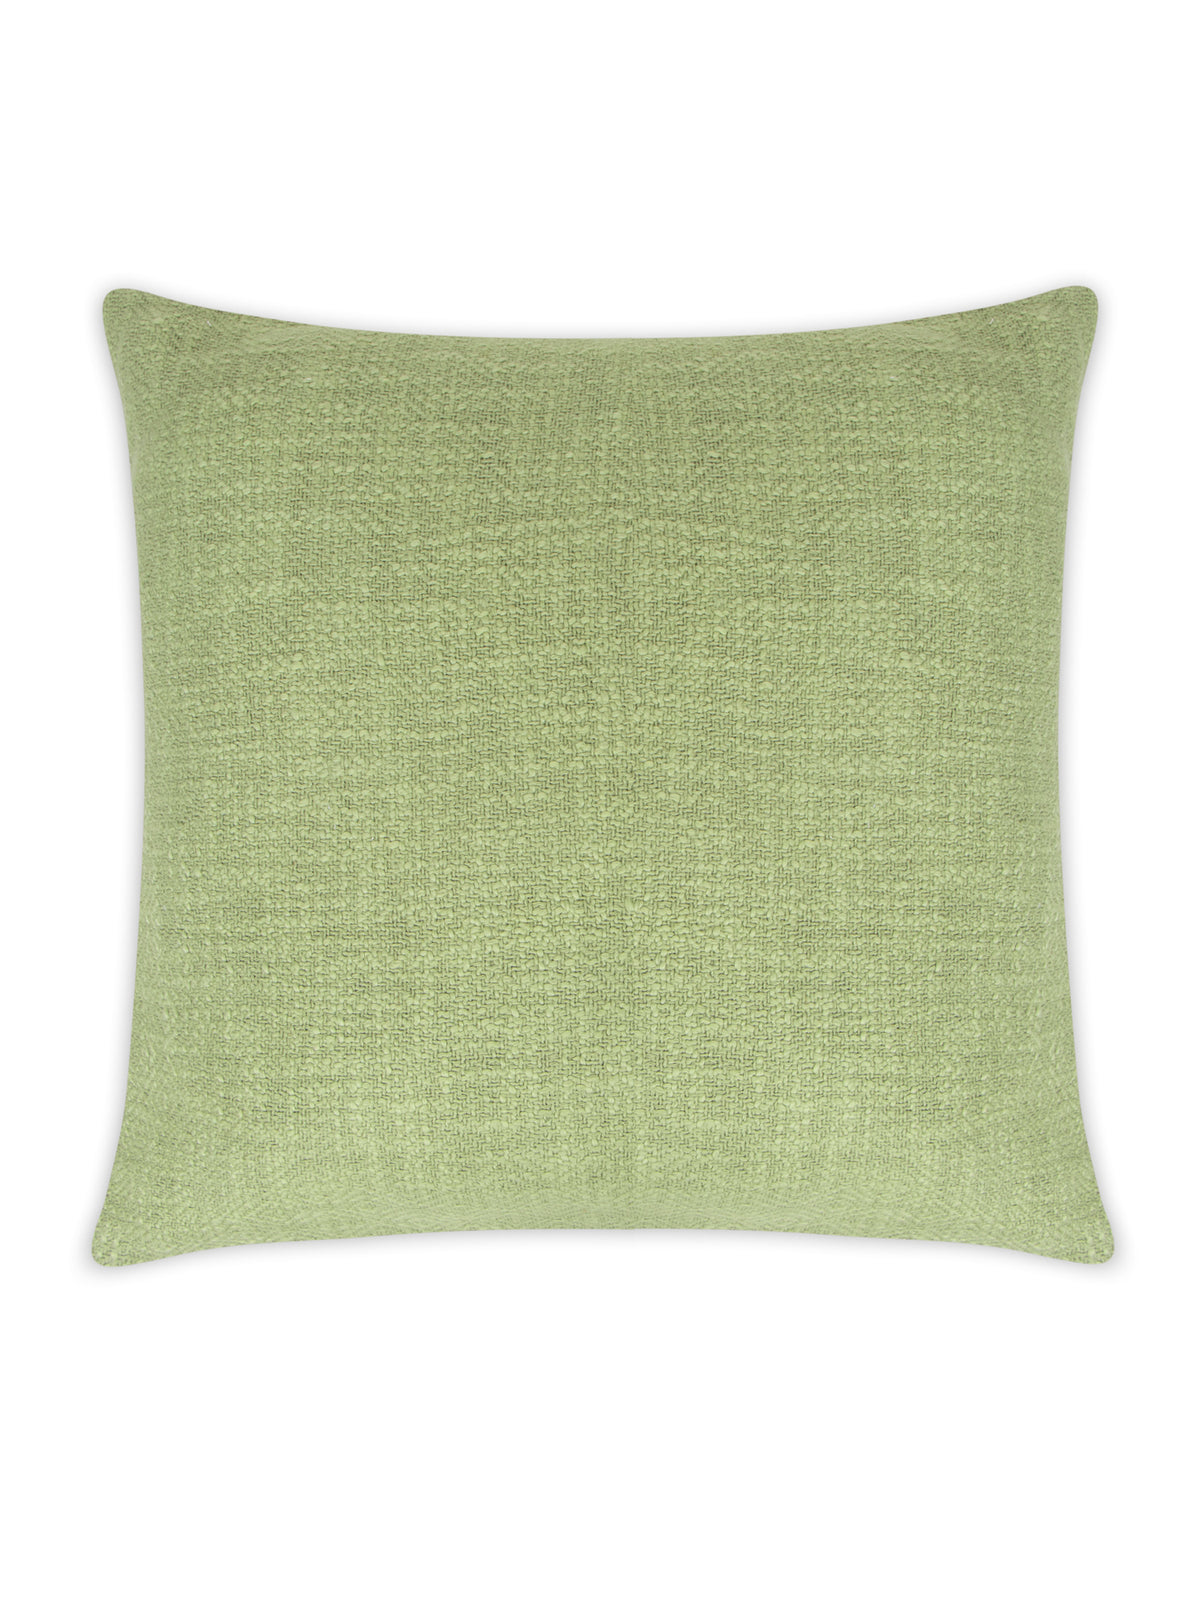 Green cotton tweed weave cushion cover